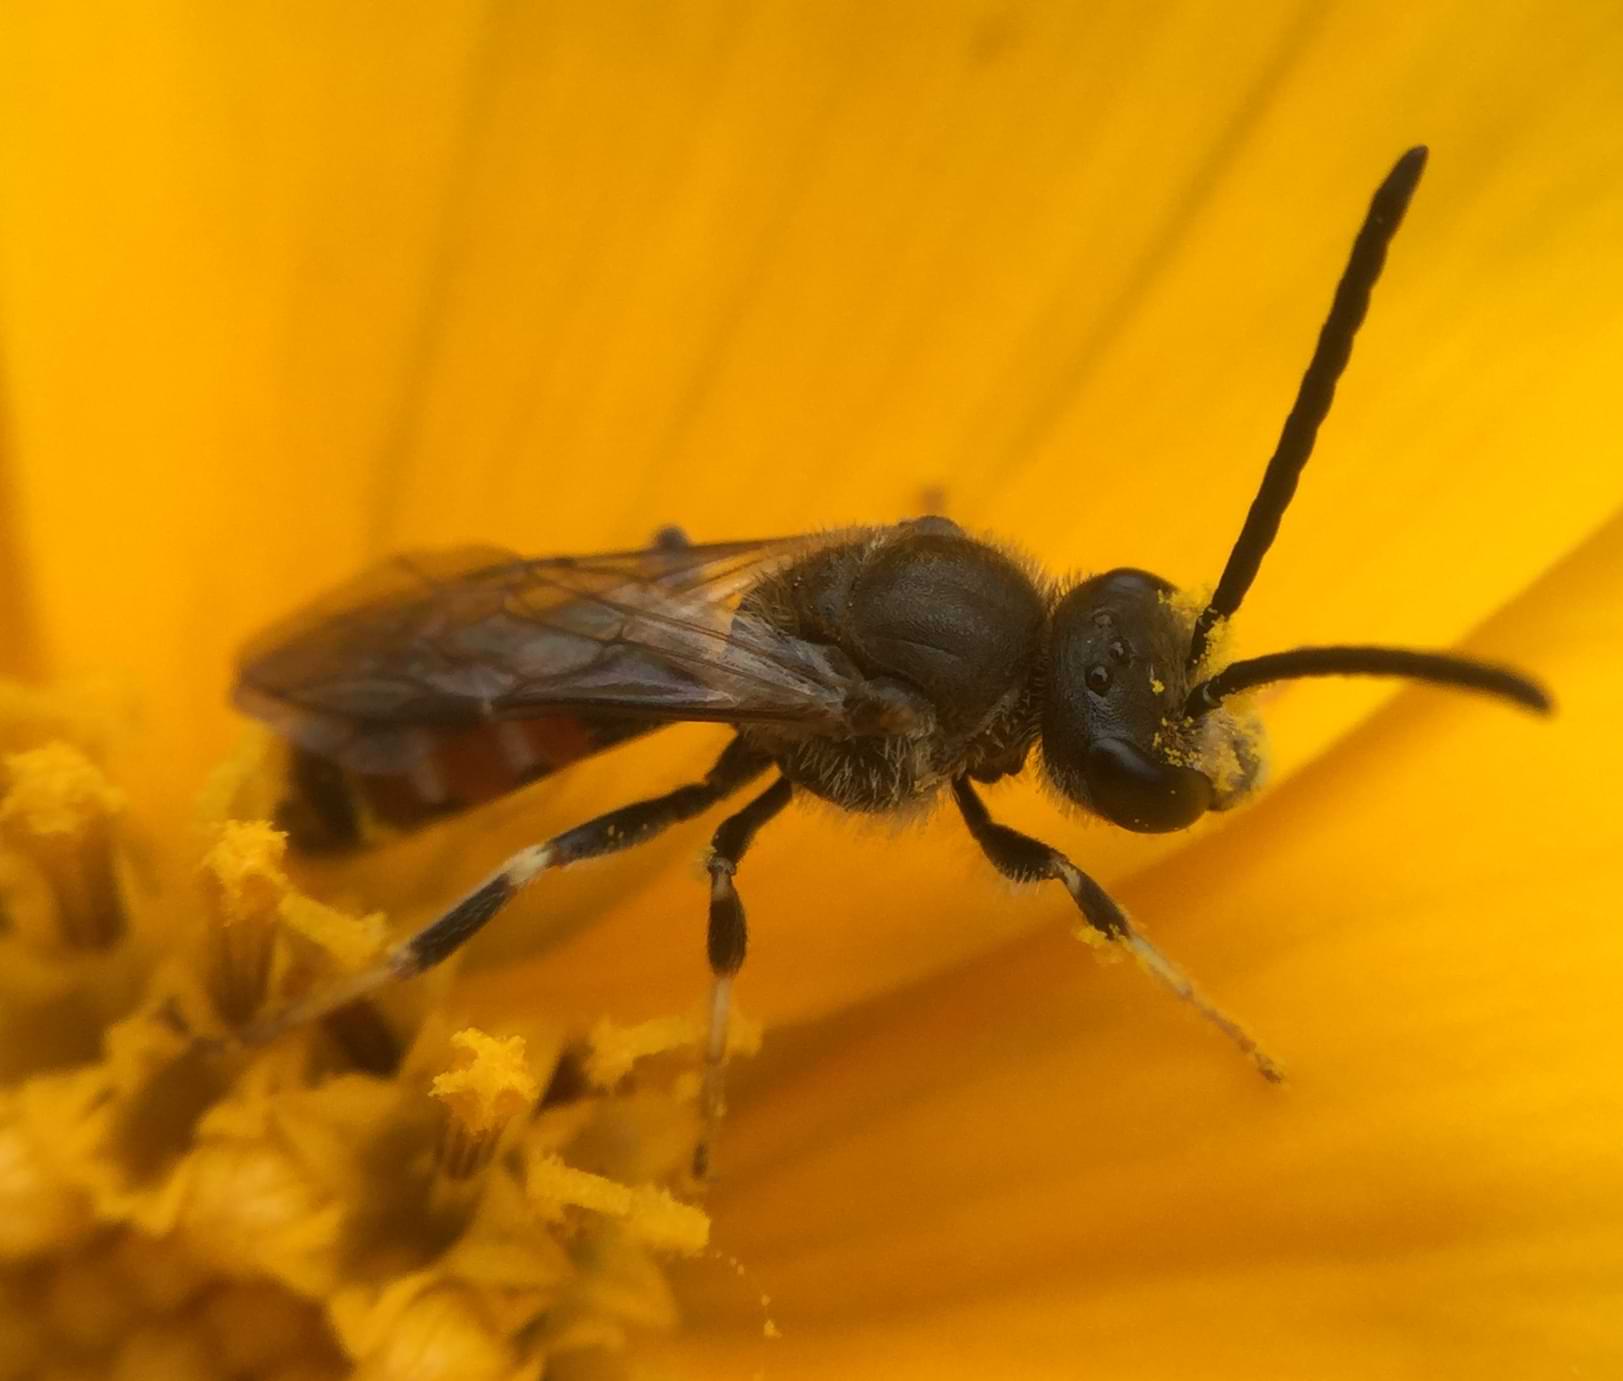 Close up photo of a tiny wasp. It is mostly black in colour and has lots of yellow pollen stuck to its face and forelegs.